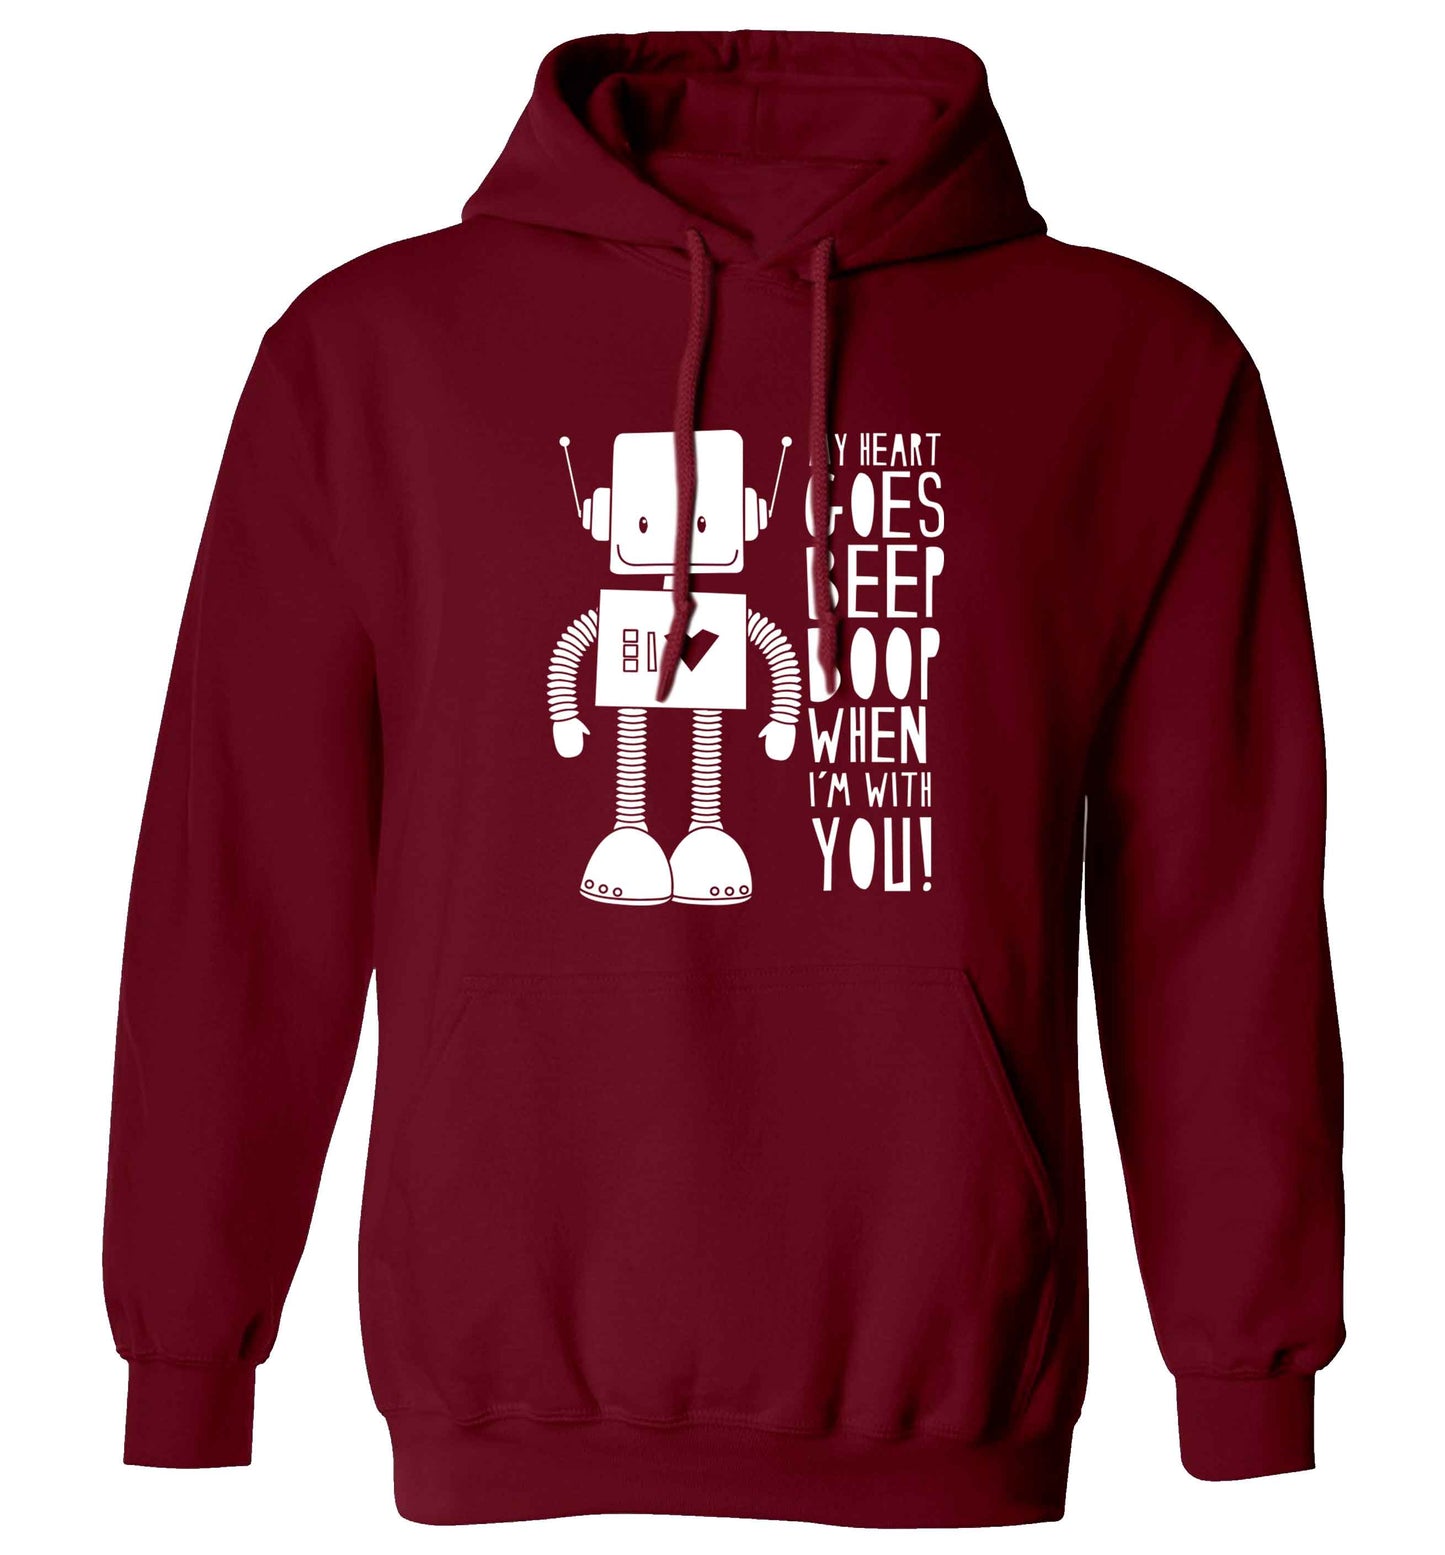 My heart goes beep boop when I'm with you adults unisex maroon hoodie 2XL